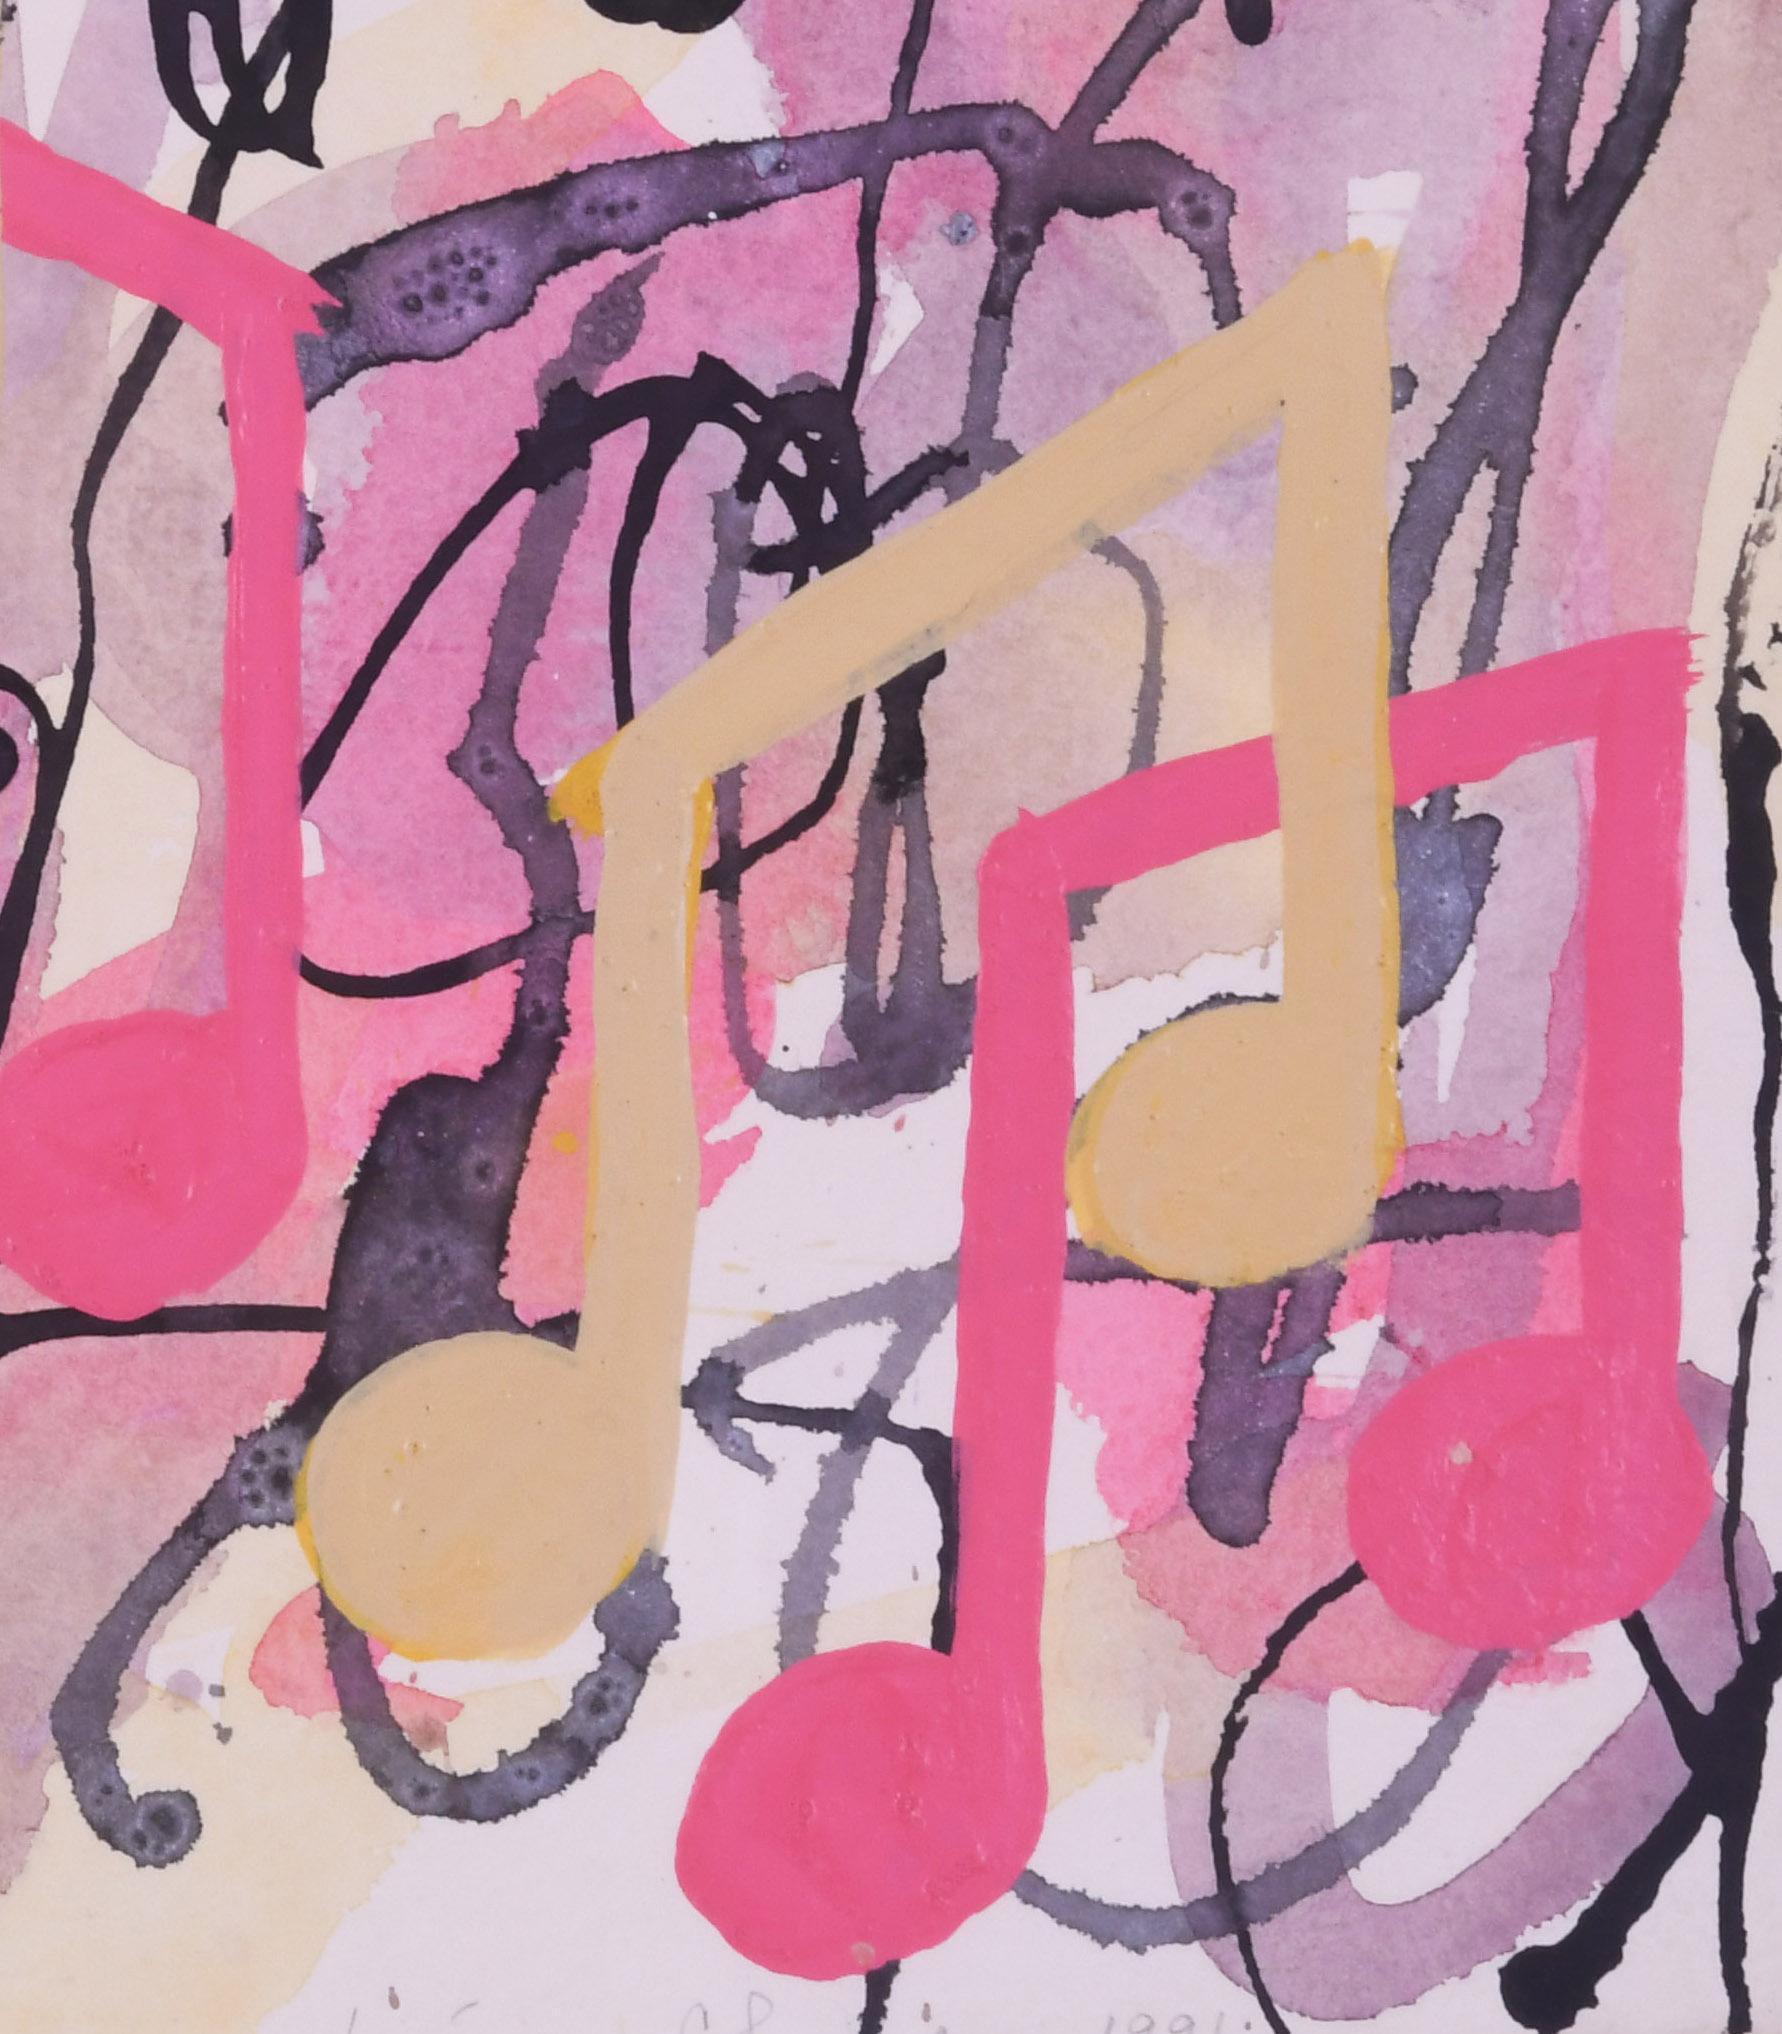 Untitled (Musical notes abstraction)
Mixed media on paper, 1991
Signed lower right center
Condition: Very good
                  Archival framing with conservation glass
Provenance: Distinguished Midwestern Private Collection
Chase was born in 1951